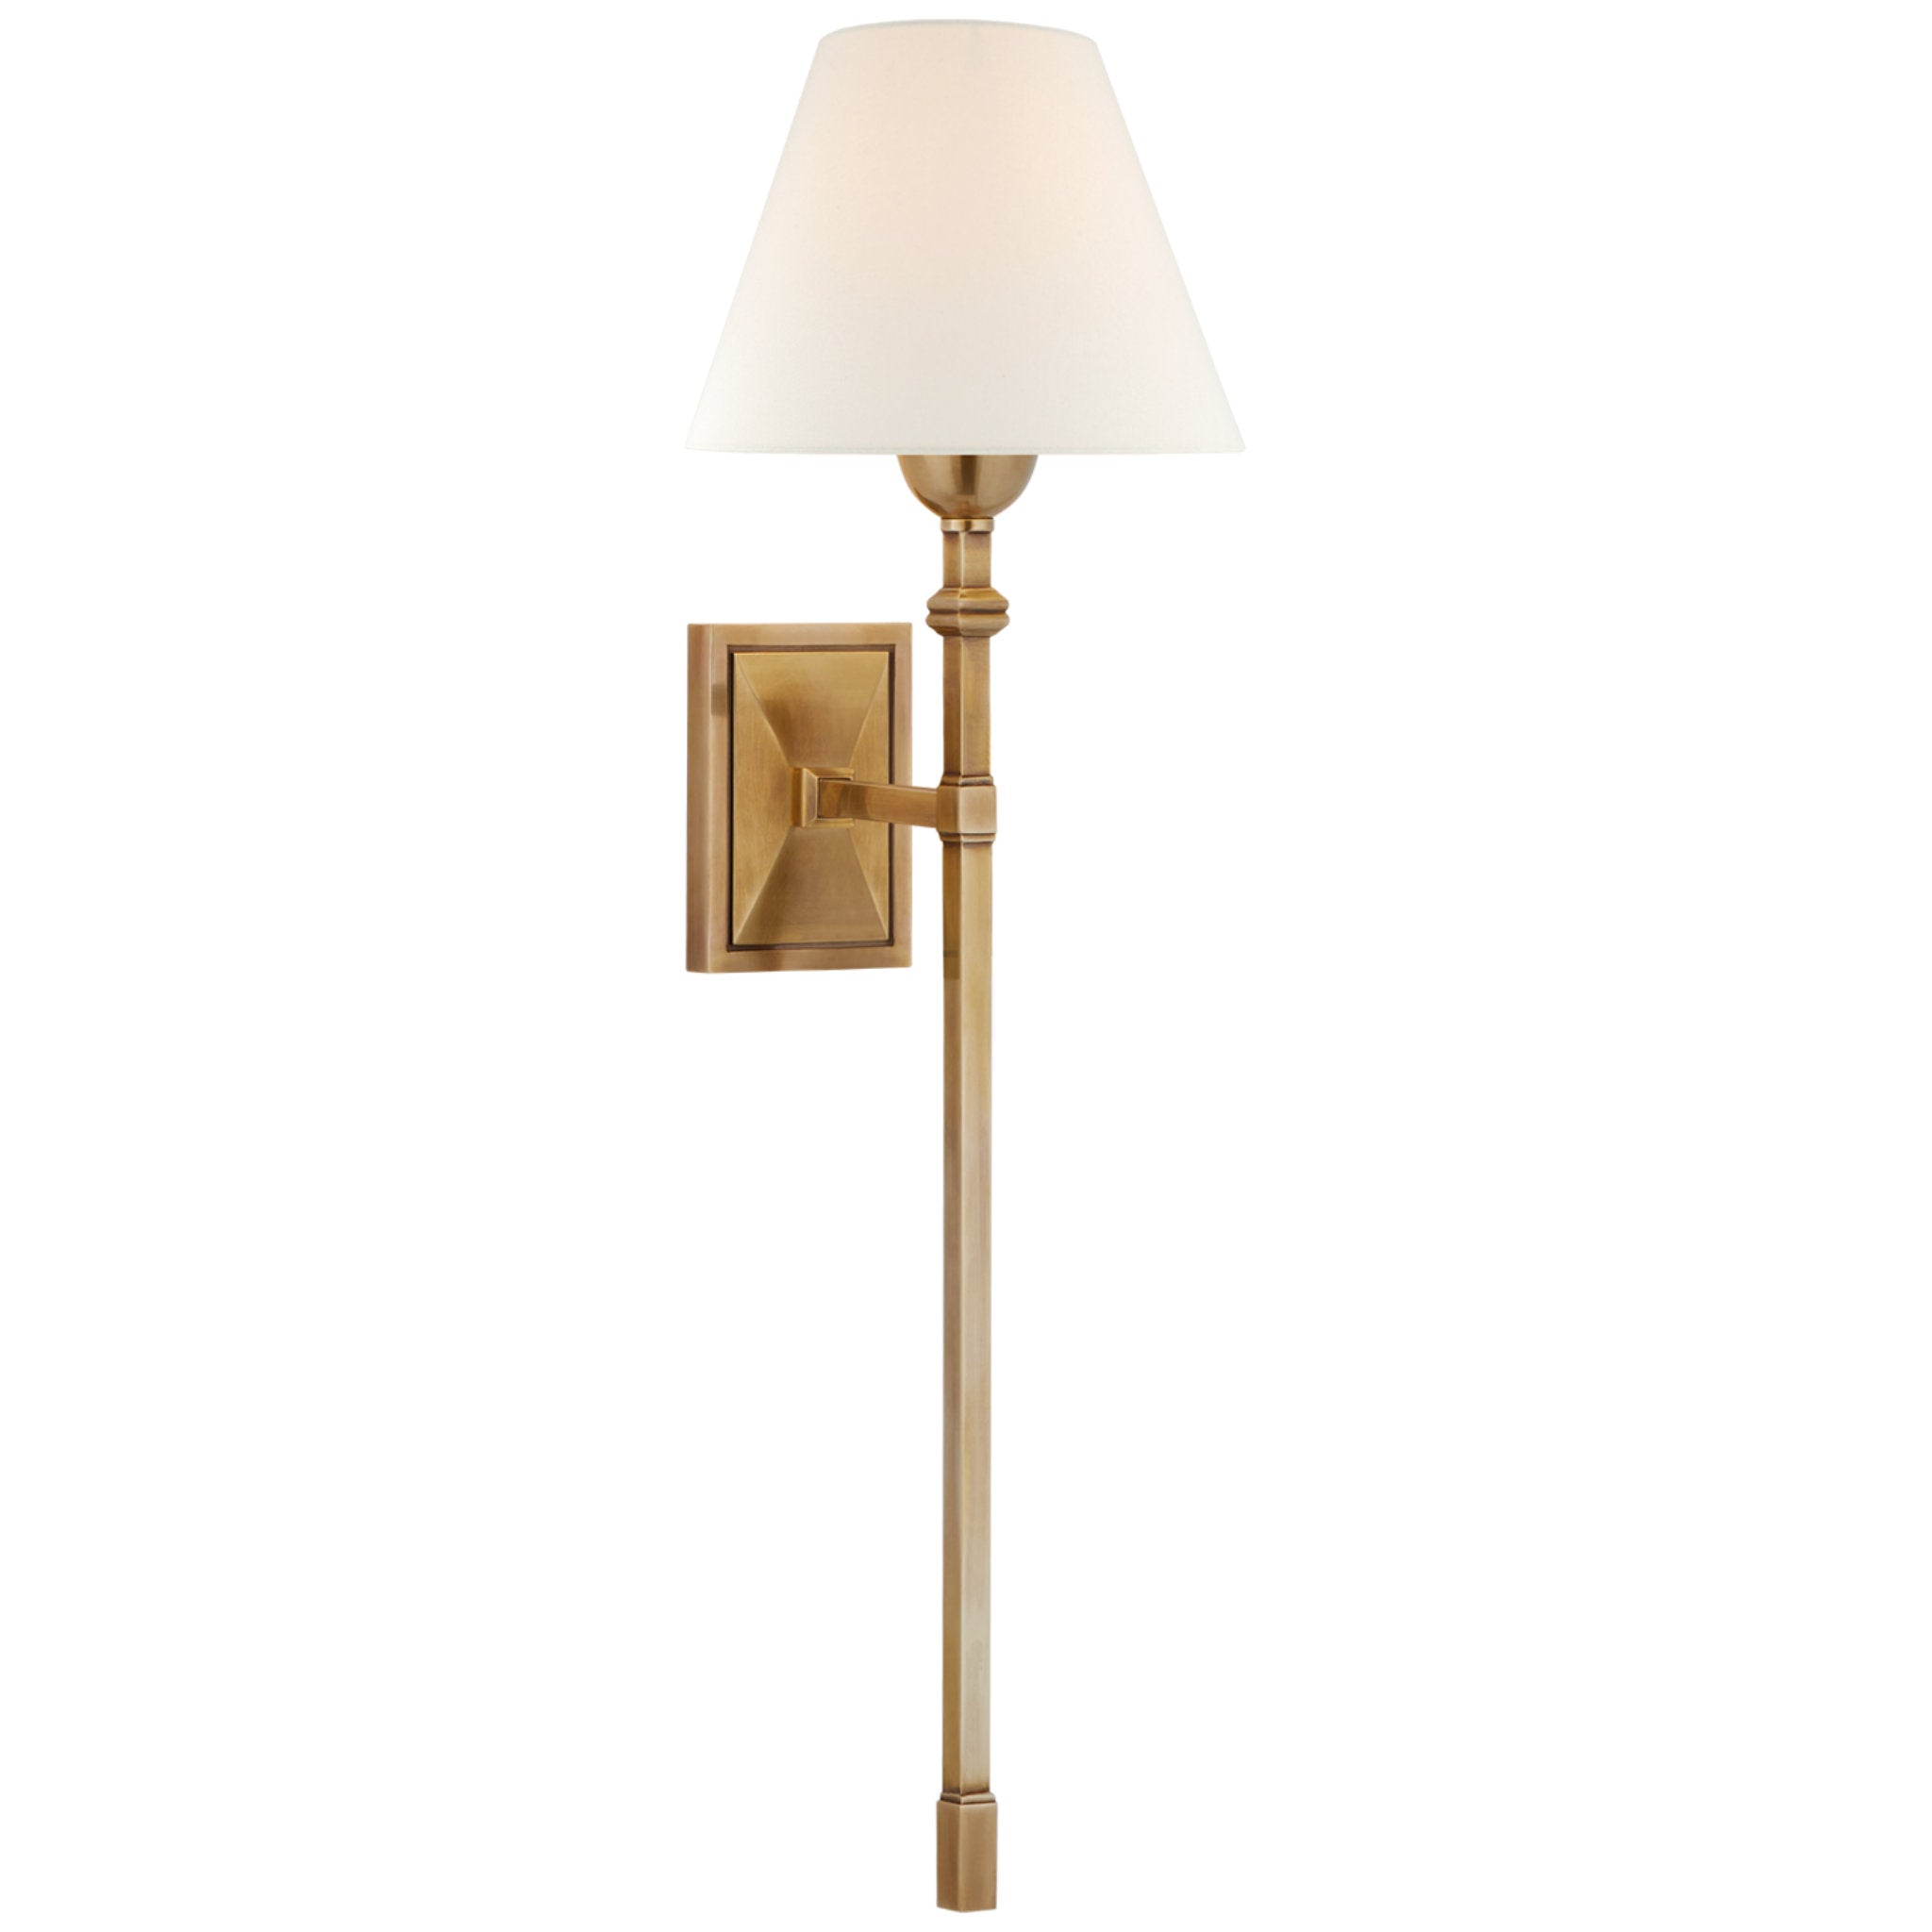 Alexa Hampton Jane Large Single Tail Sconce in Hand-Rubbed Antique Brass with Linen Shade